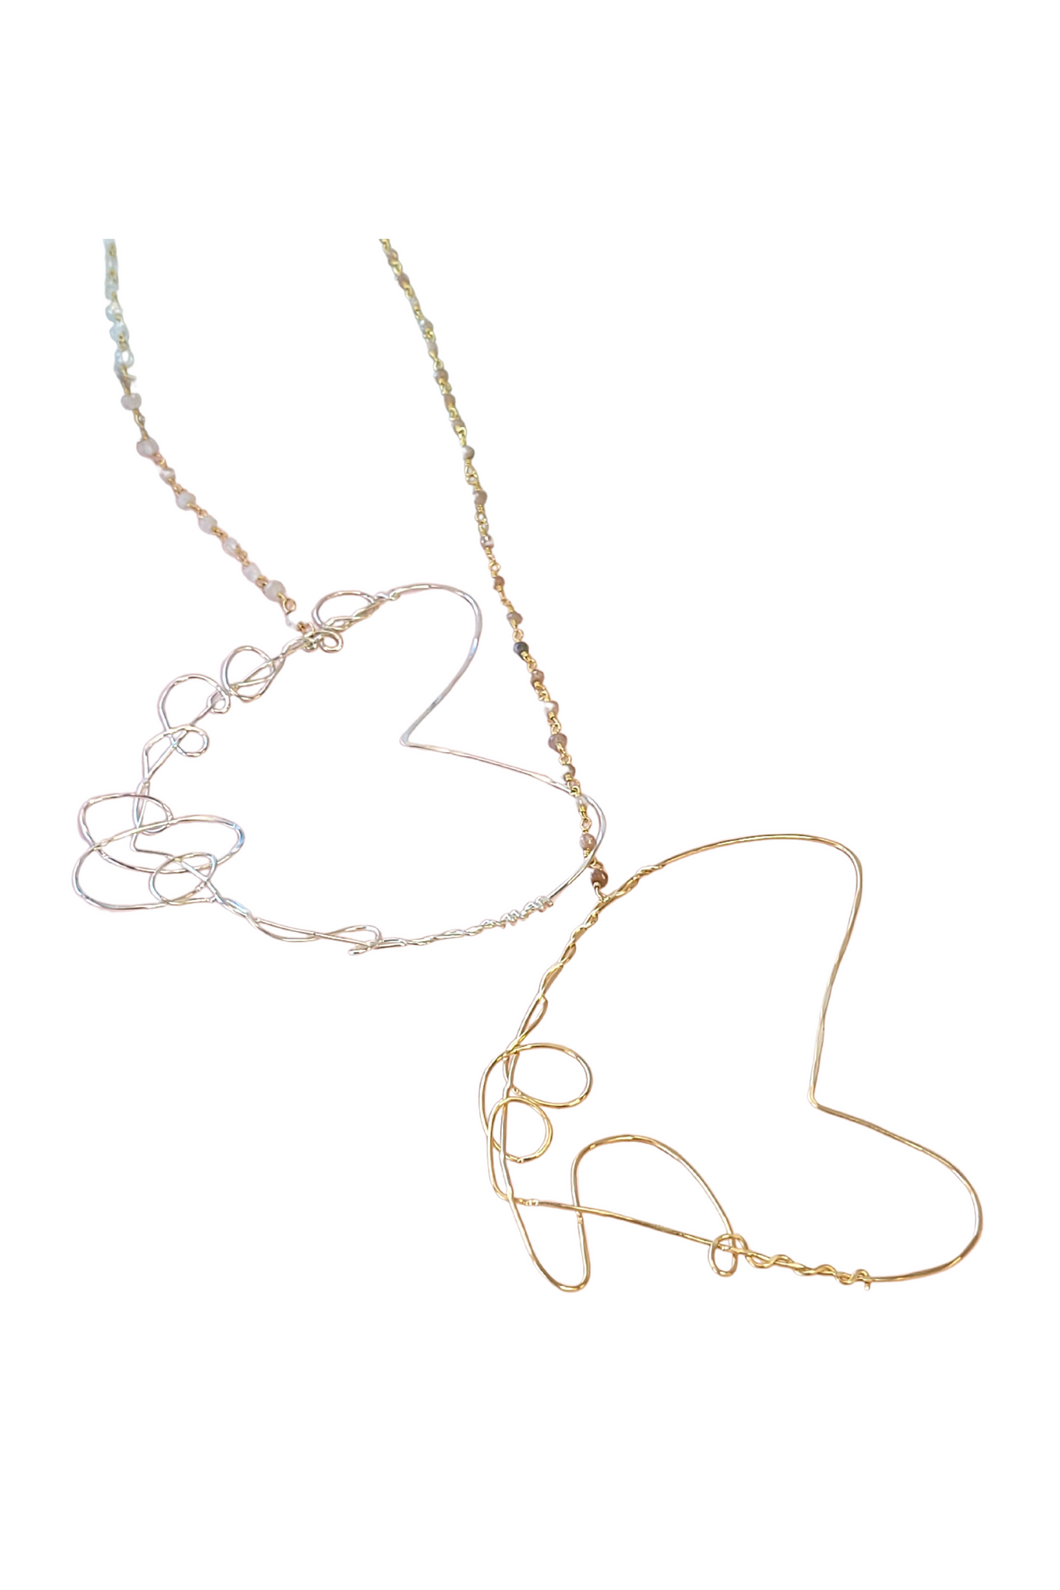 Lariat Necklace with Moonstone and Peach Moonstone Silver Gold Hearts